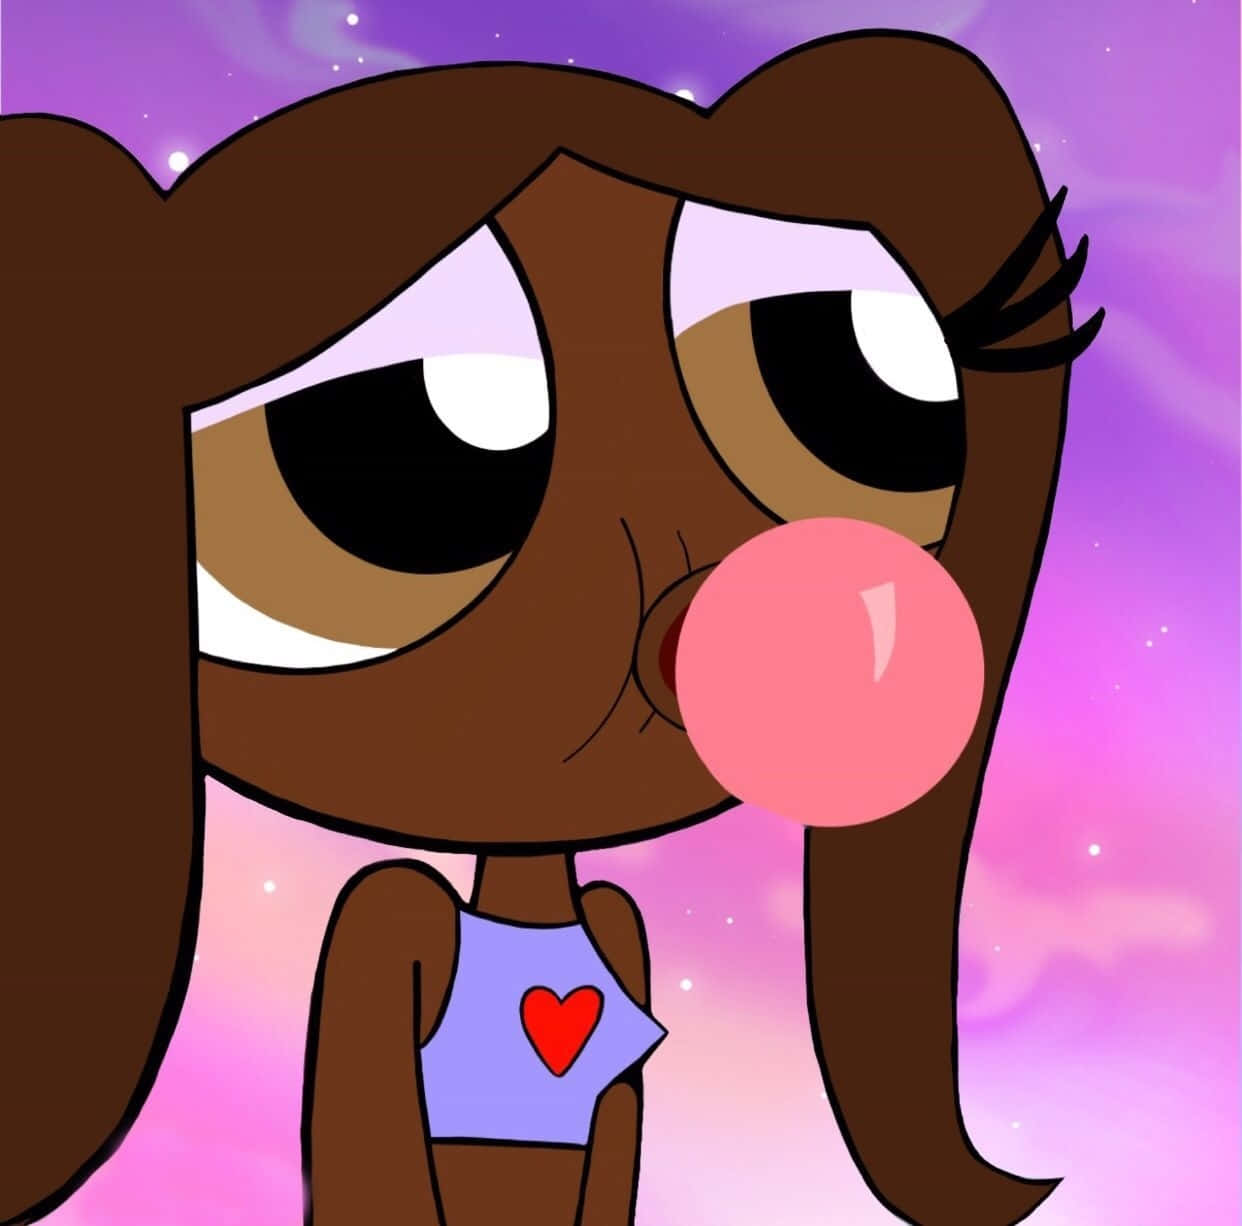 A Cartoon Girl Blowing Bubbles With A Heart On Her Face Background